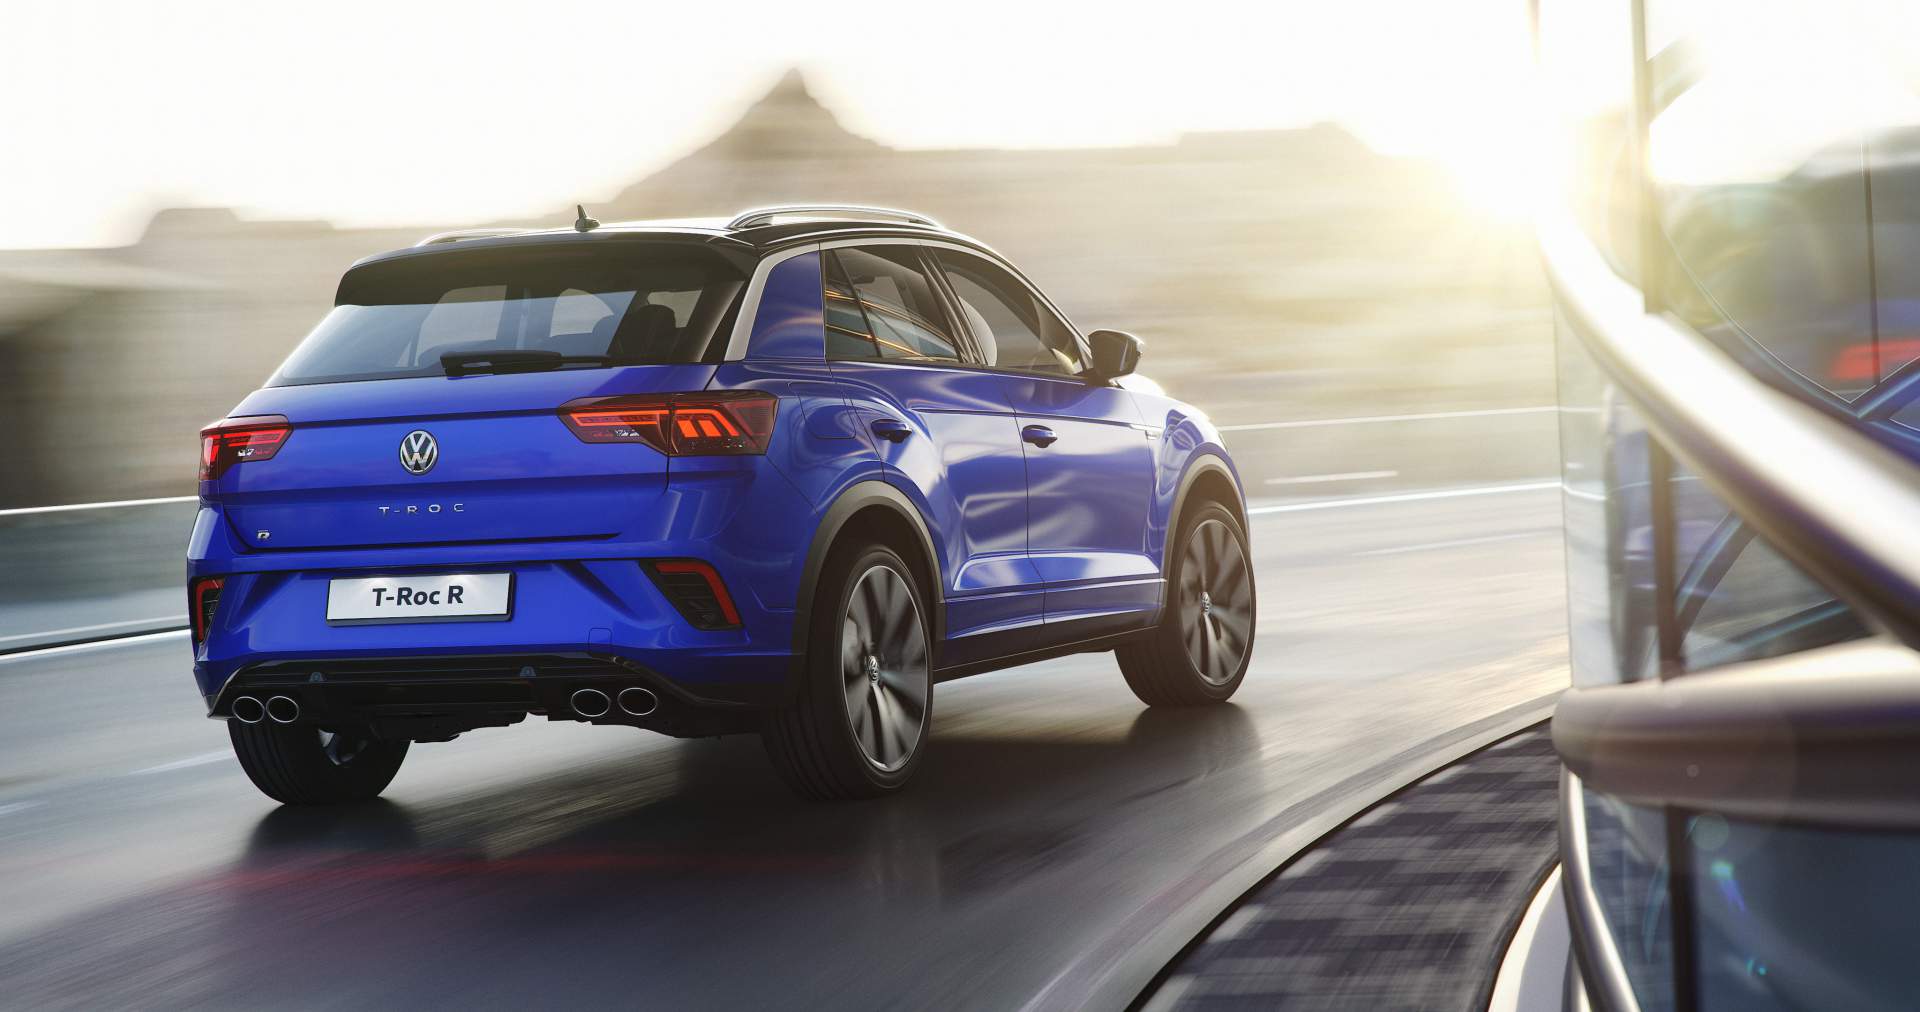 Vw T Roc R Unveiled With 300 Ps Does 0 100 Km H In 4 9 Seconds Carscoops